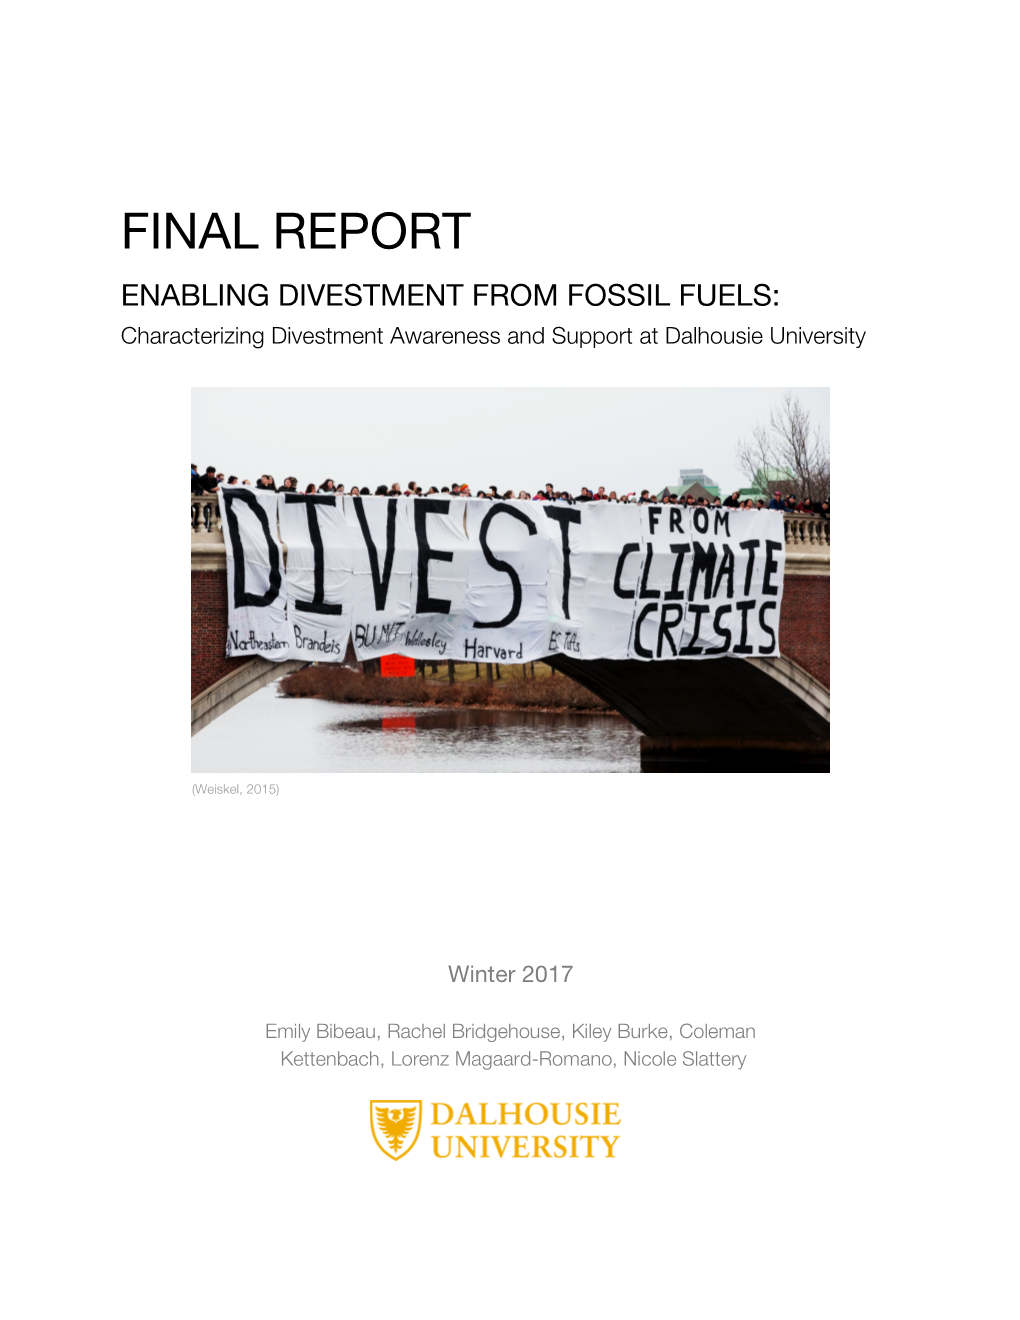 FINAL REPORT ENABLING DIVESTMENT from FOSSIL FUELS: Characterizing Divestment Awareness and Support at Dalhousie University